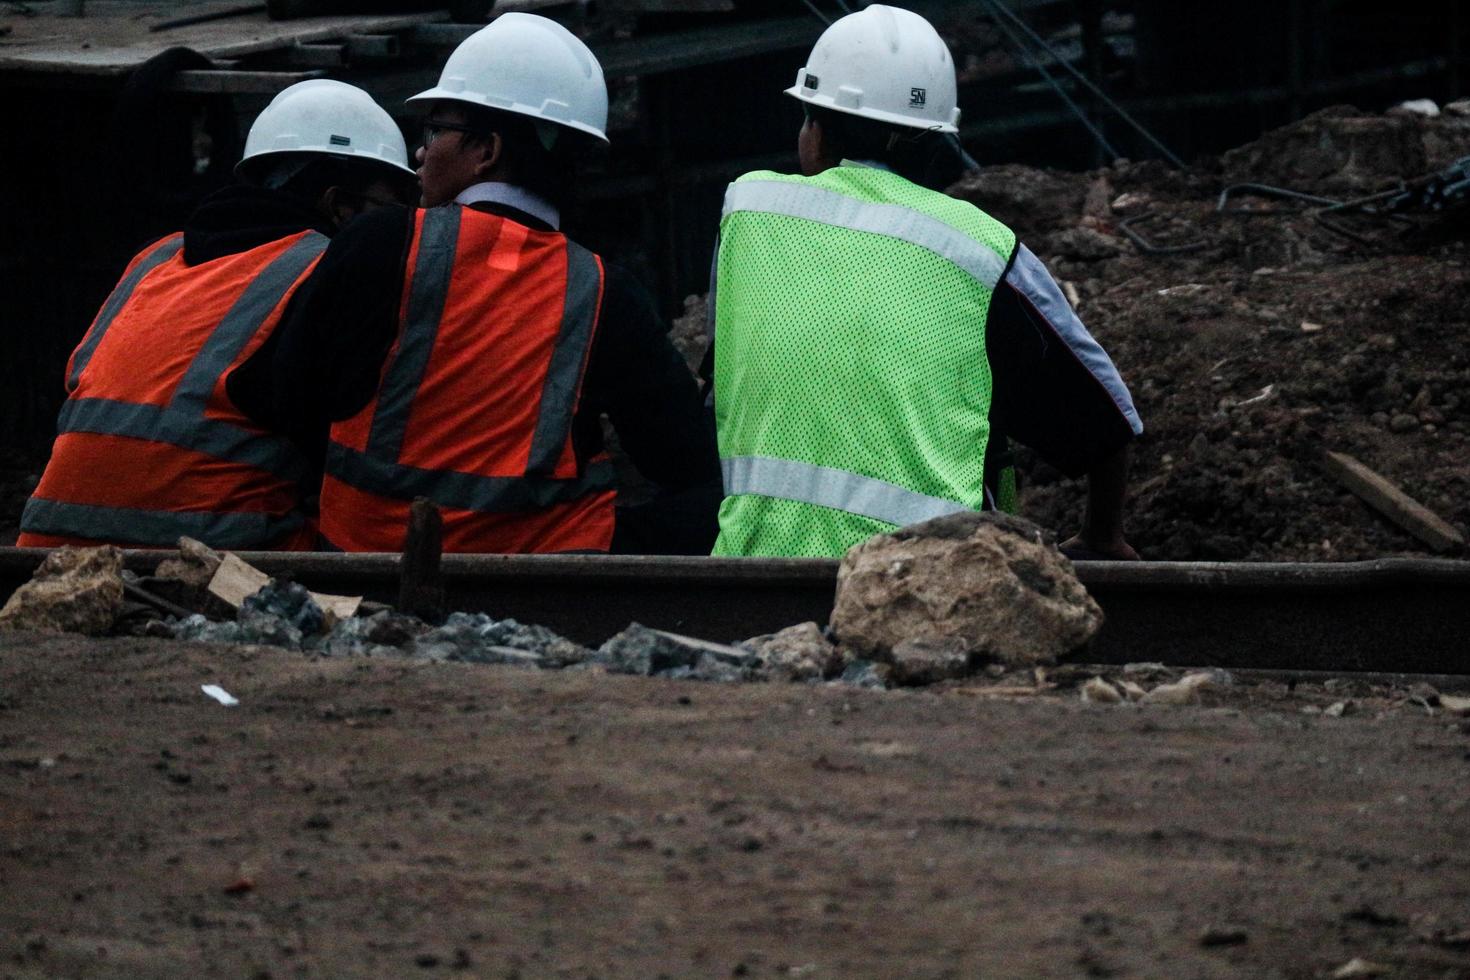 Jakarta, Indonesia in July 2022. Three construction workers are resting to unwind after work by sitting on the edge of the construction site photo